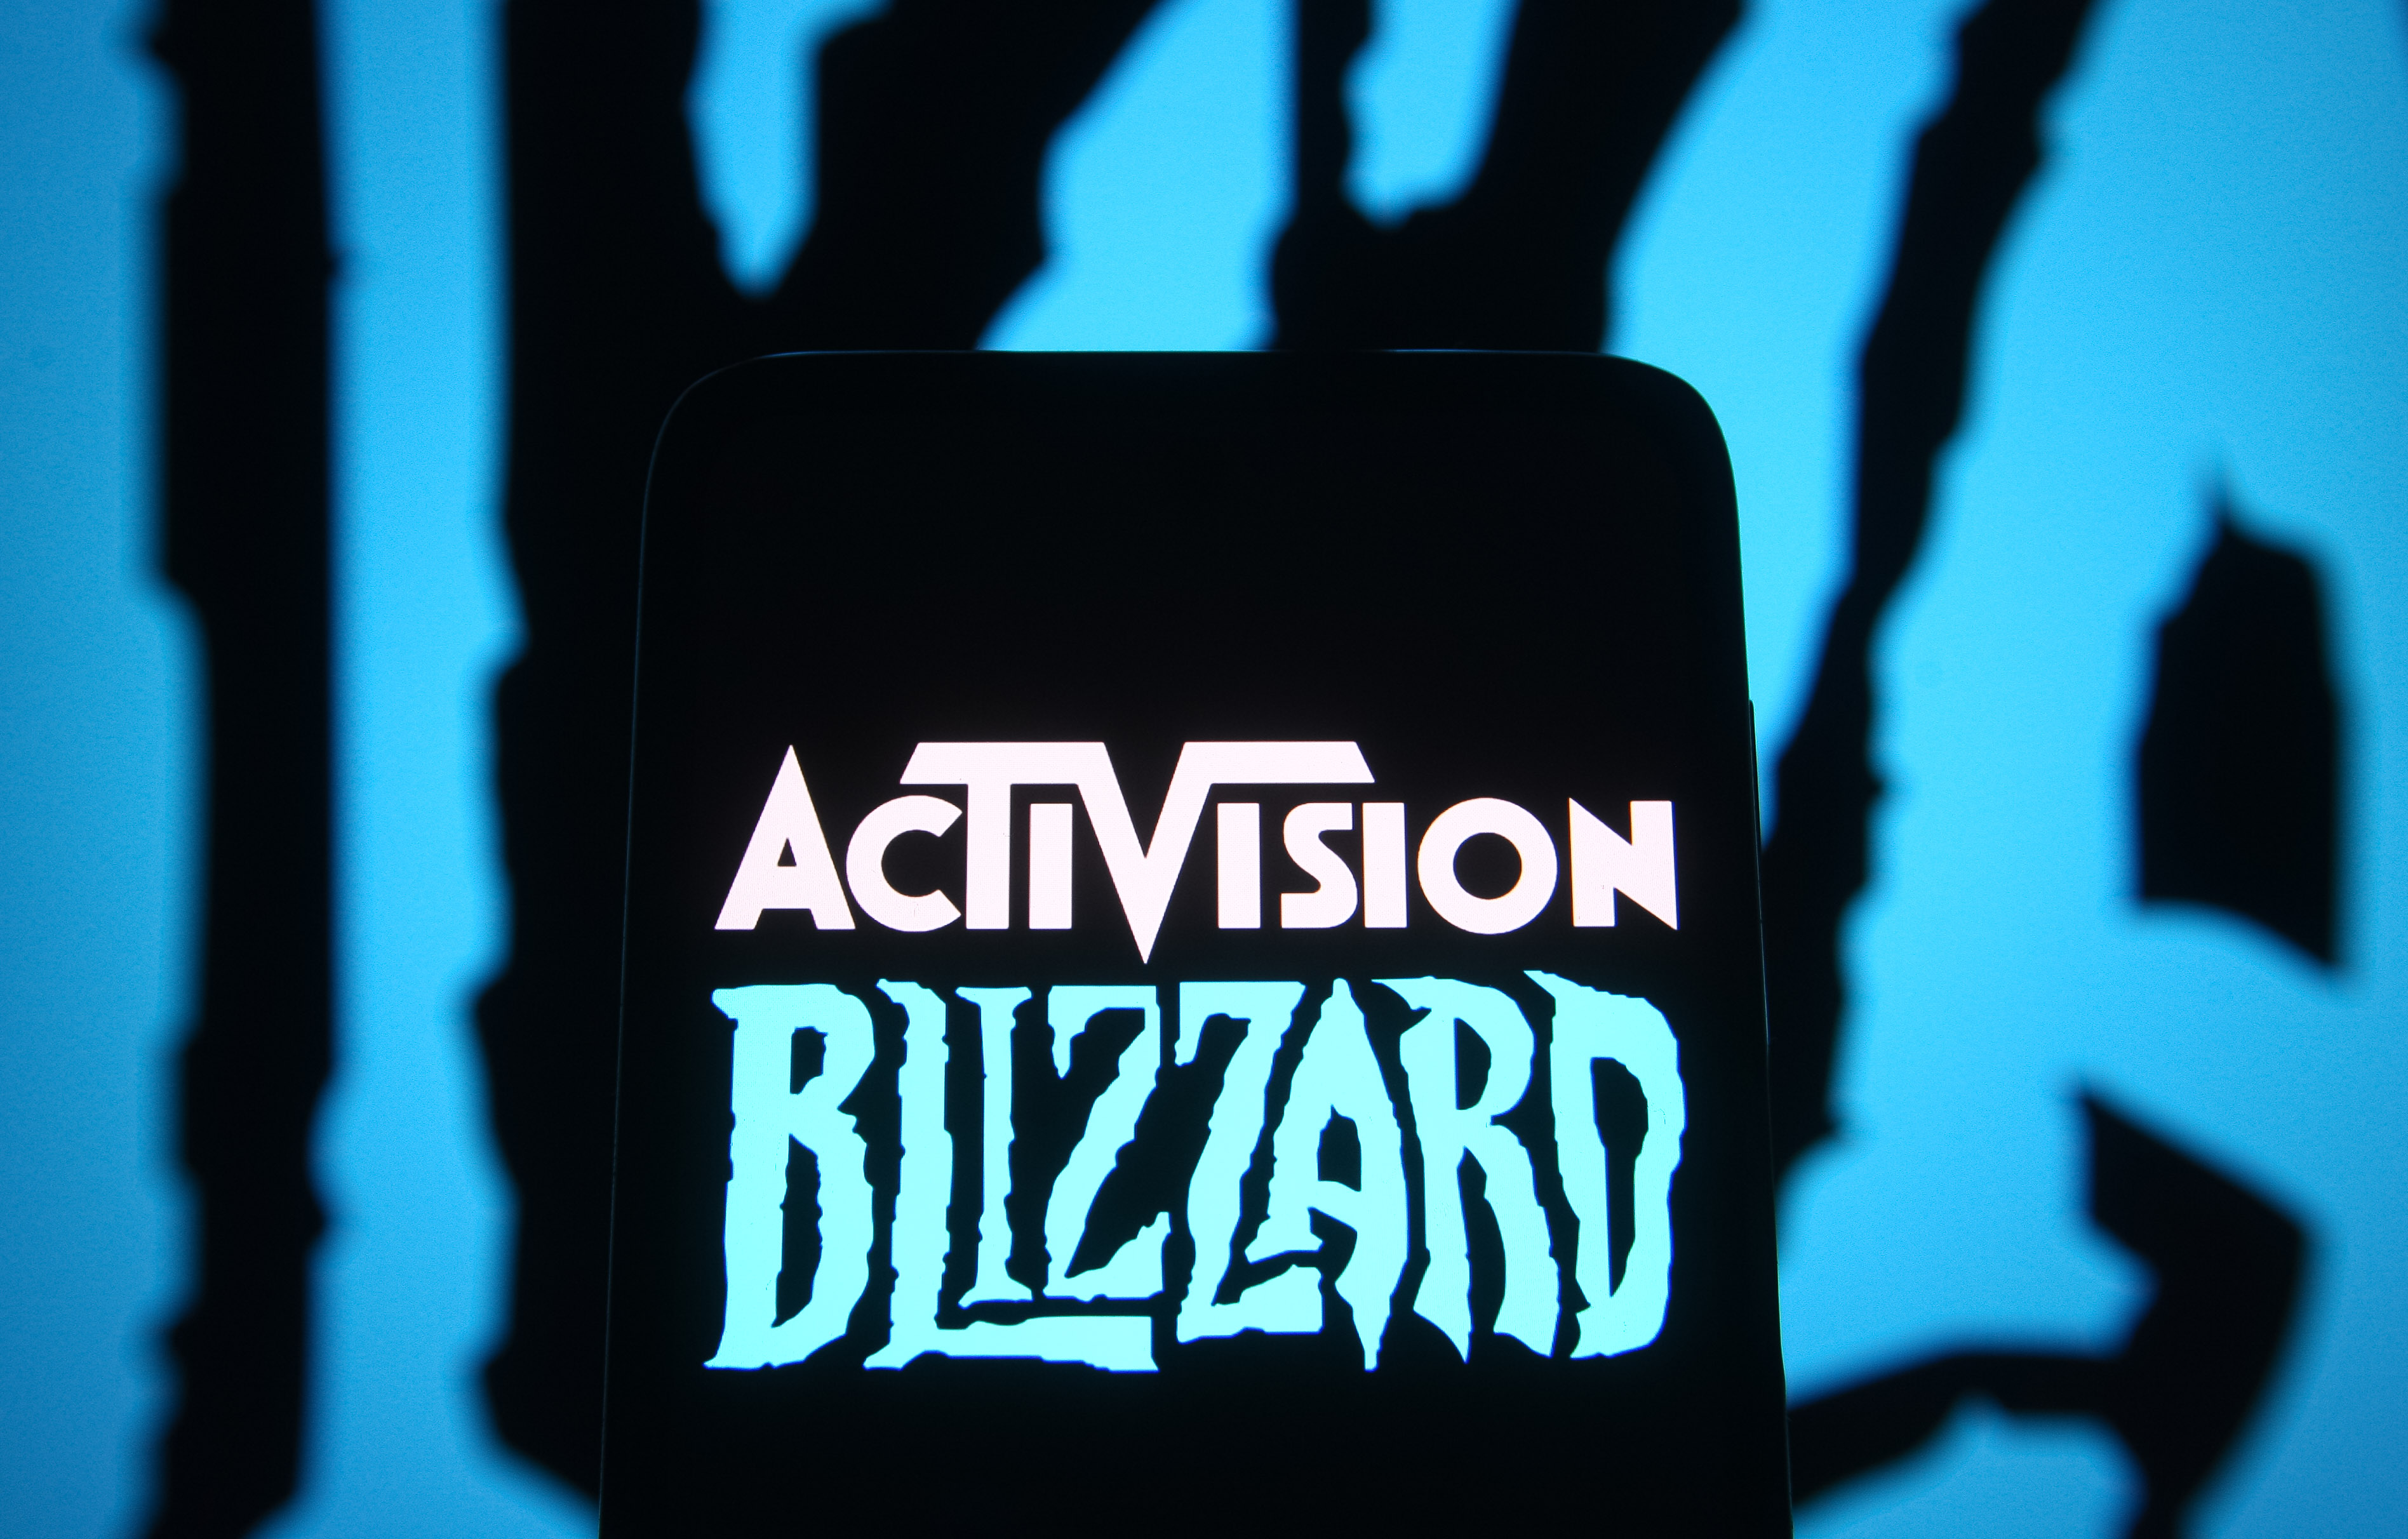 California Sues Activision Blizzard For Alleged Sexist ‘frat boy’ Culture